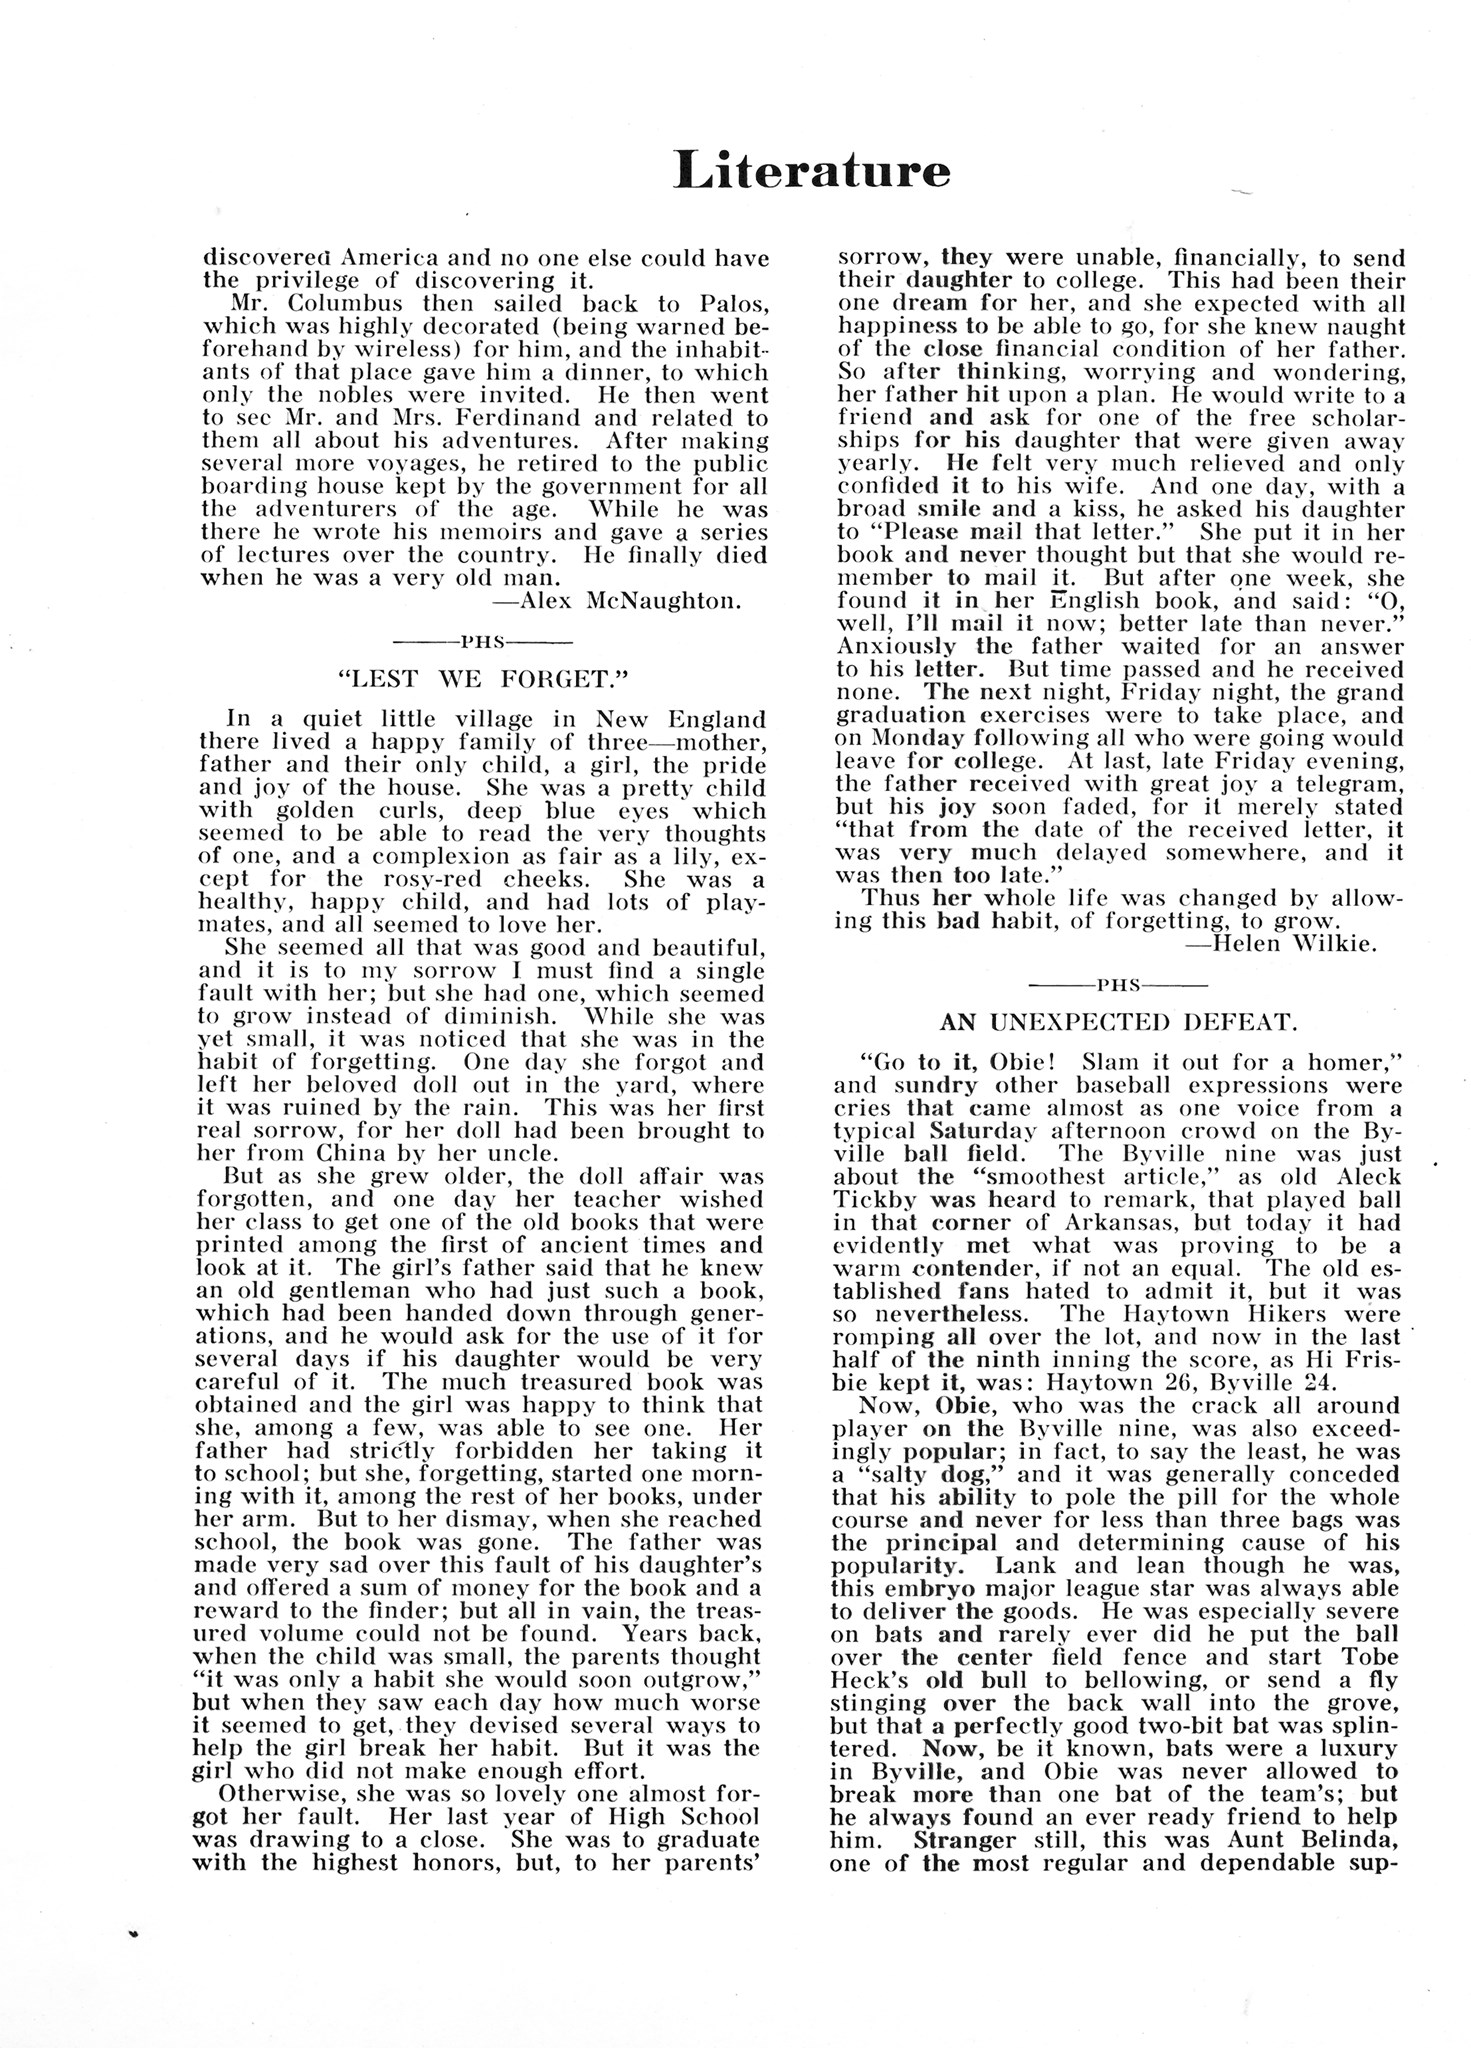 ../../../Images/Large/1915/Arclight-1915-pg0080.jpg